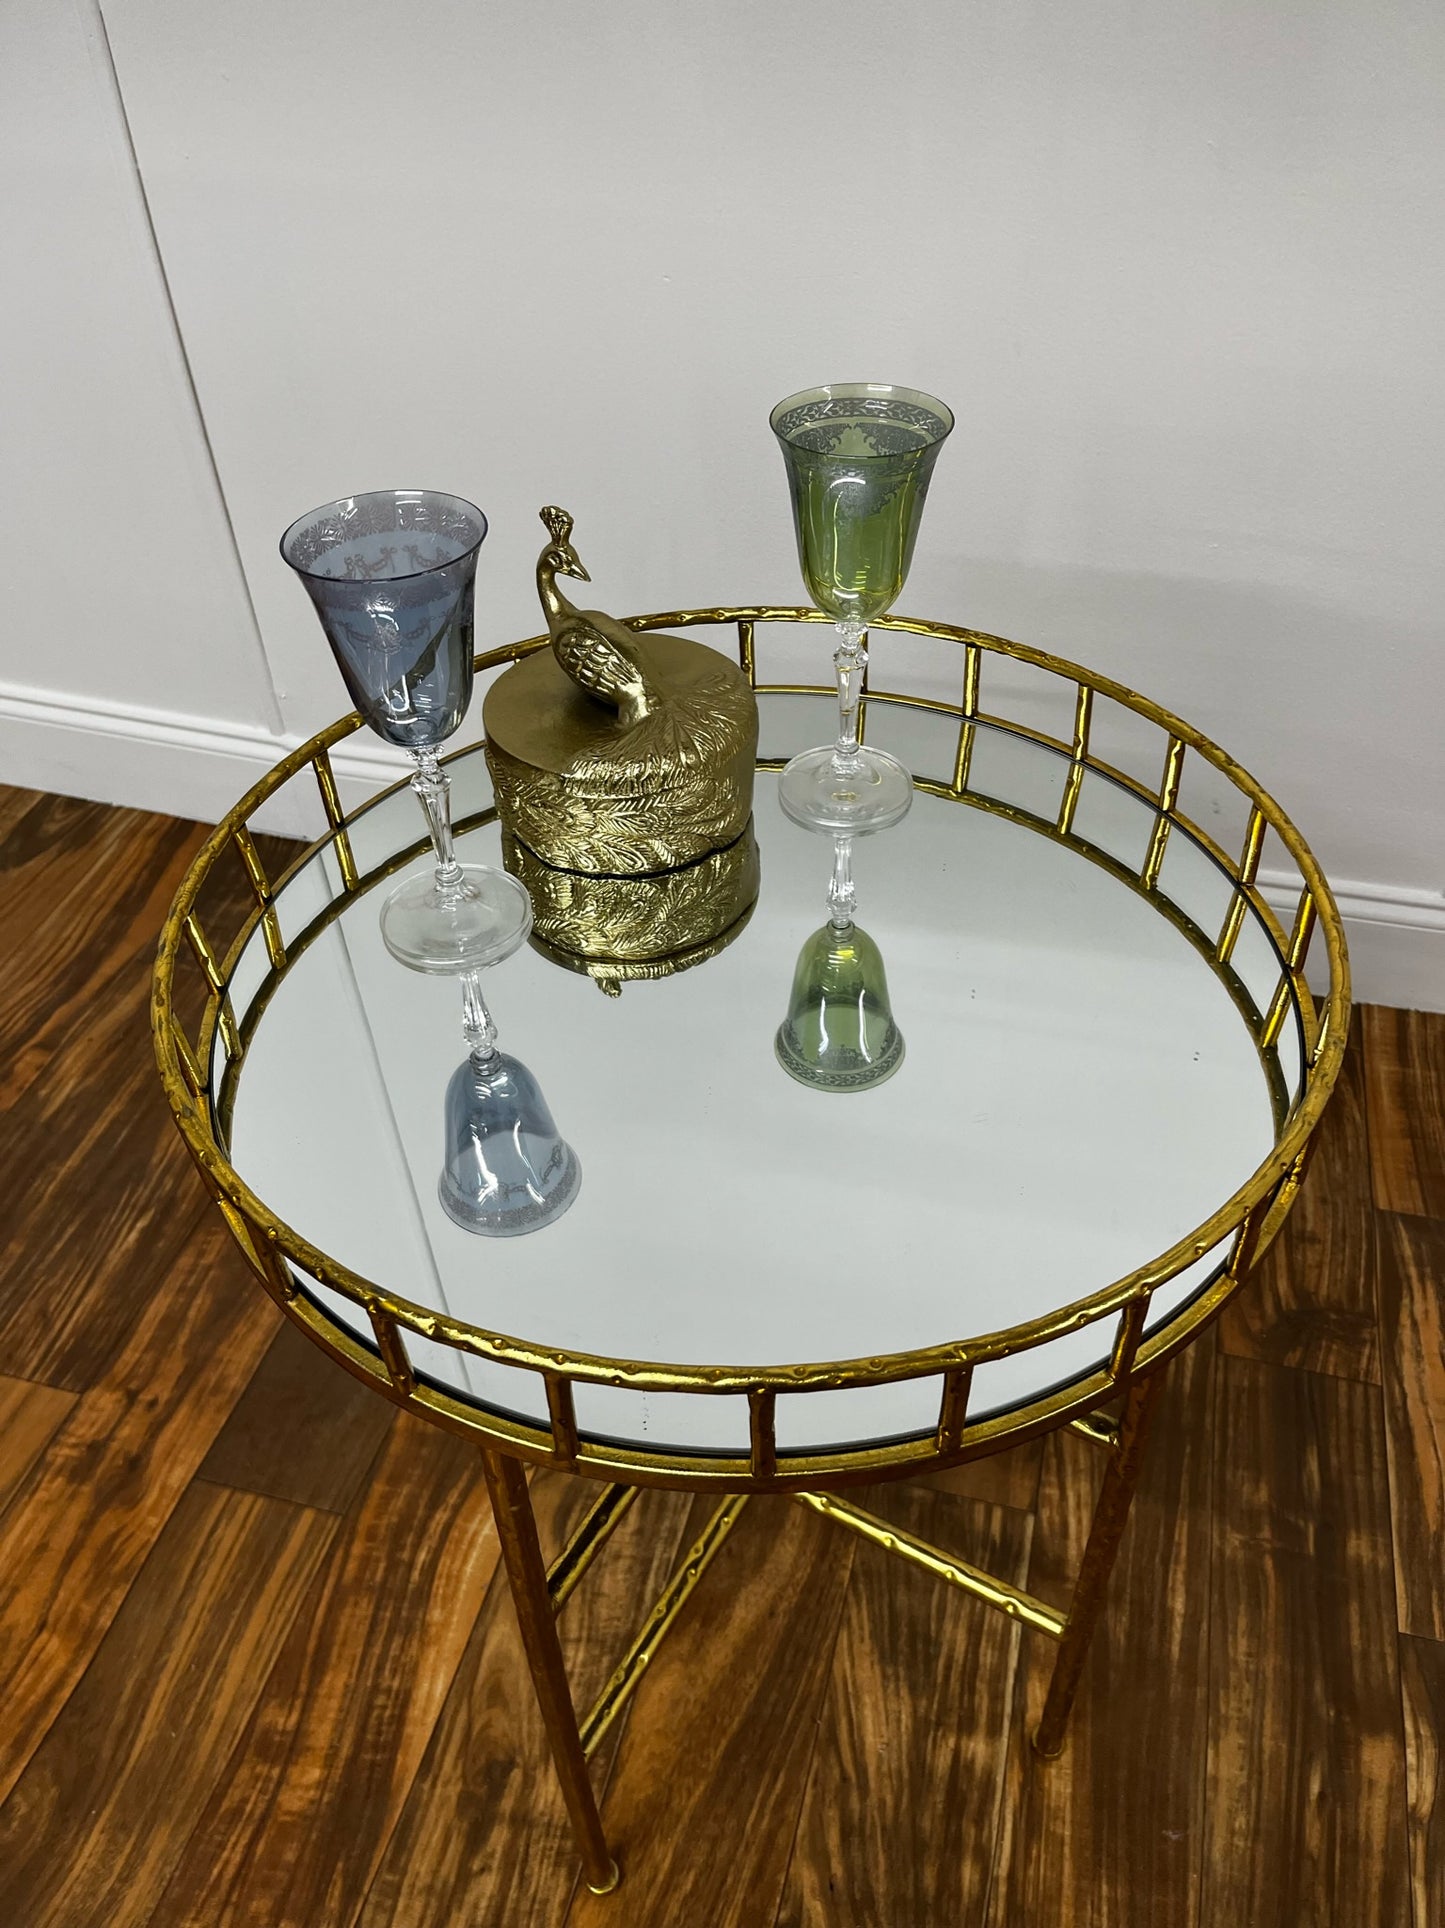 ROUND MIRROR ACCENT TABLE WITH GOLD BAMBOO LEGS